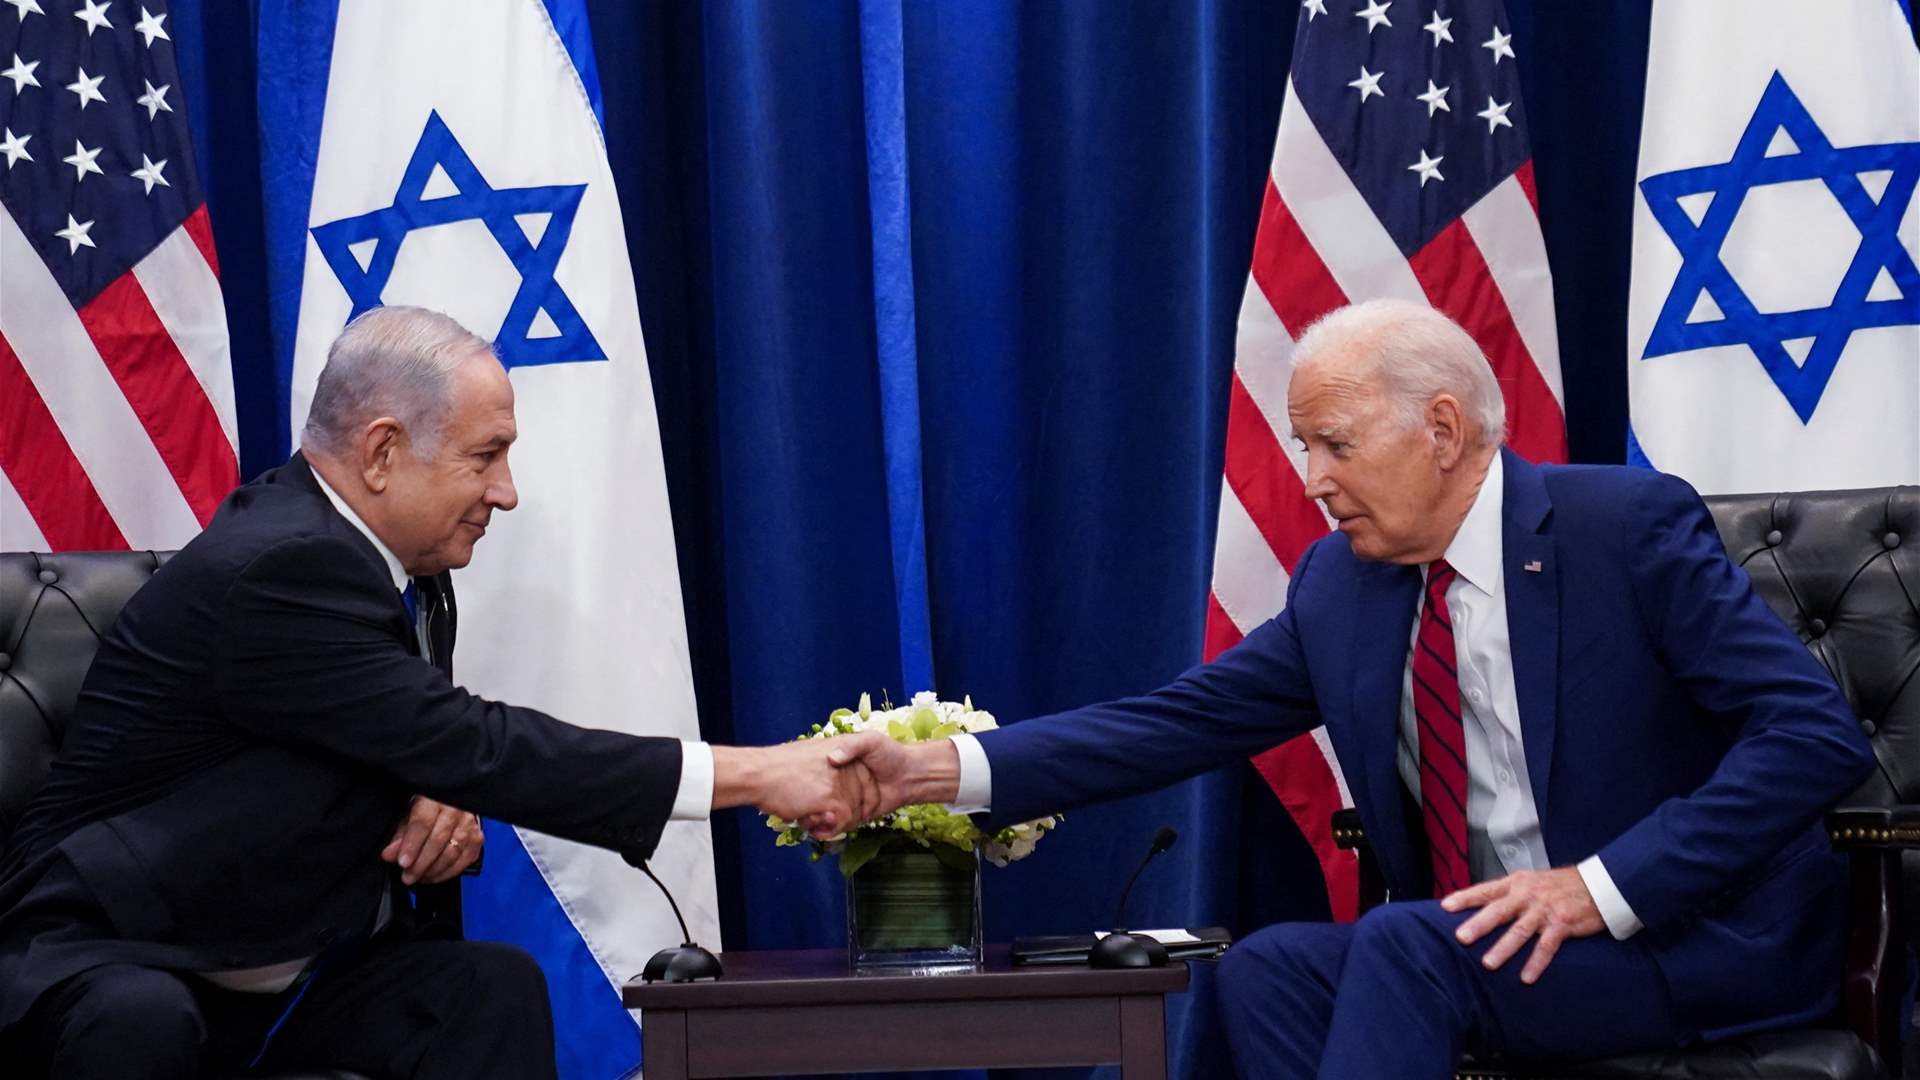 Second phone call between Netanyahu and Biden in the past 24 hours